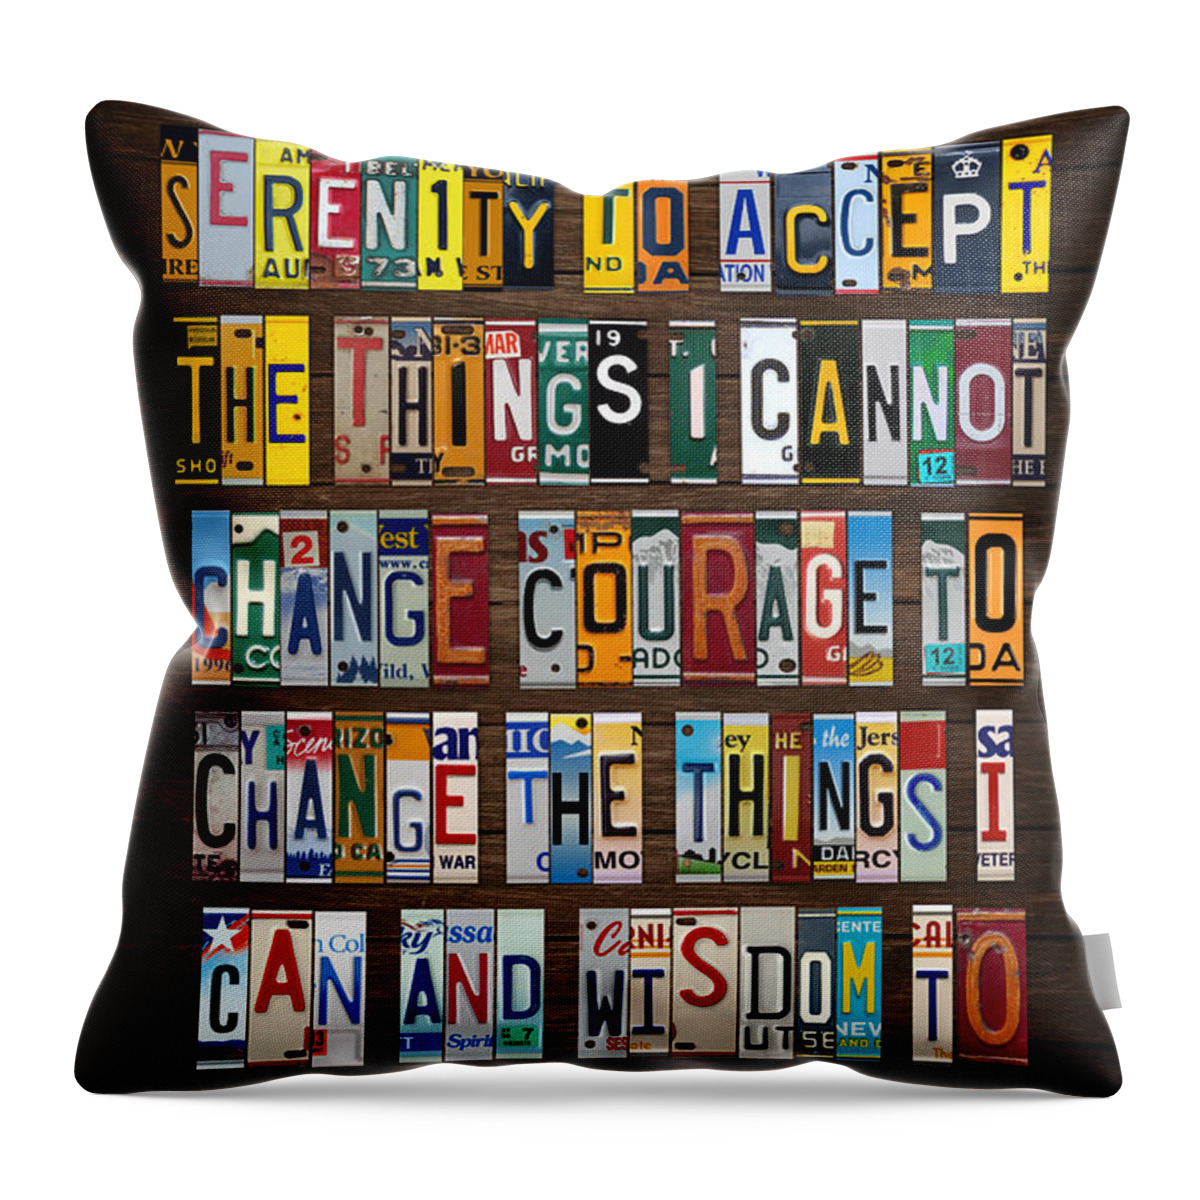 Serenity Prayer Throw Pillow featuring the mixed media Serenity Prayer Reinhold Niebuhr Recycled Vintage American License Plate Letter Art by Design Turnpike